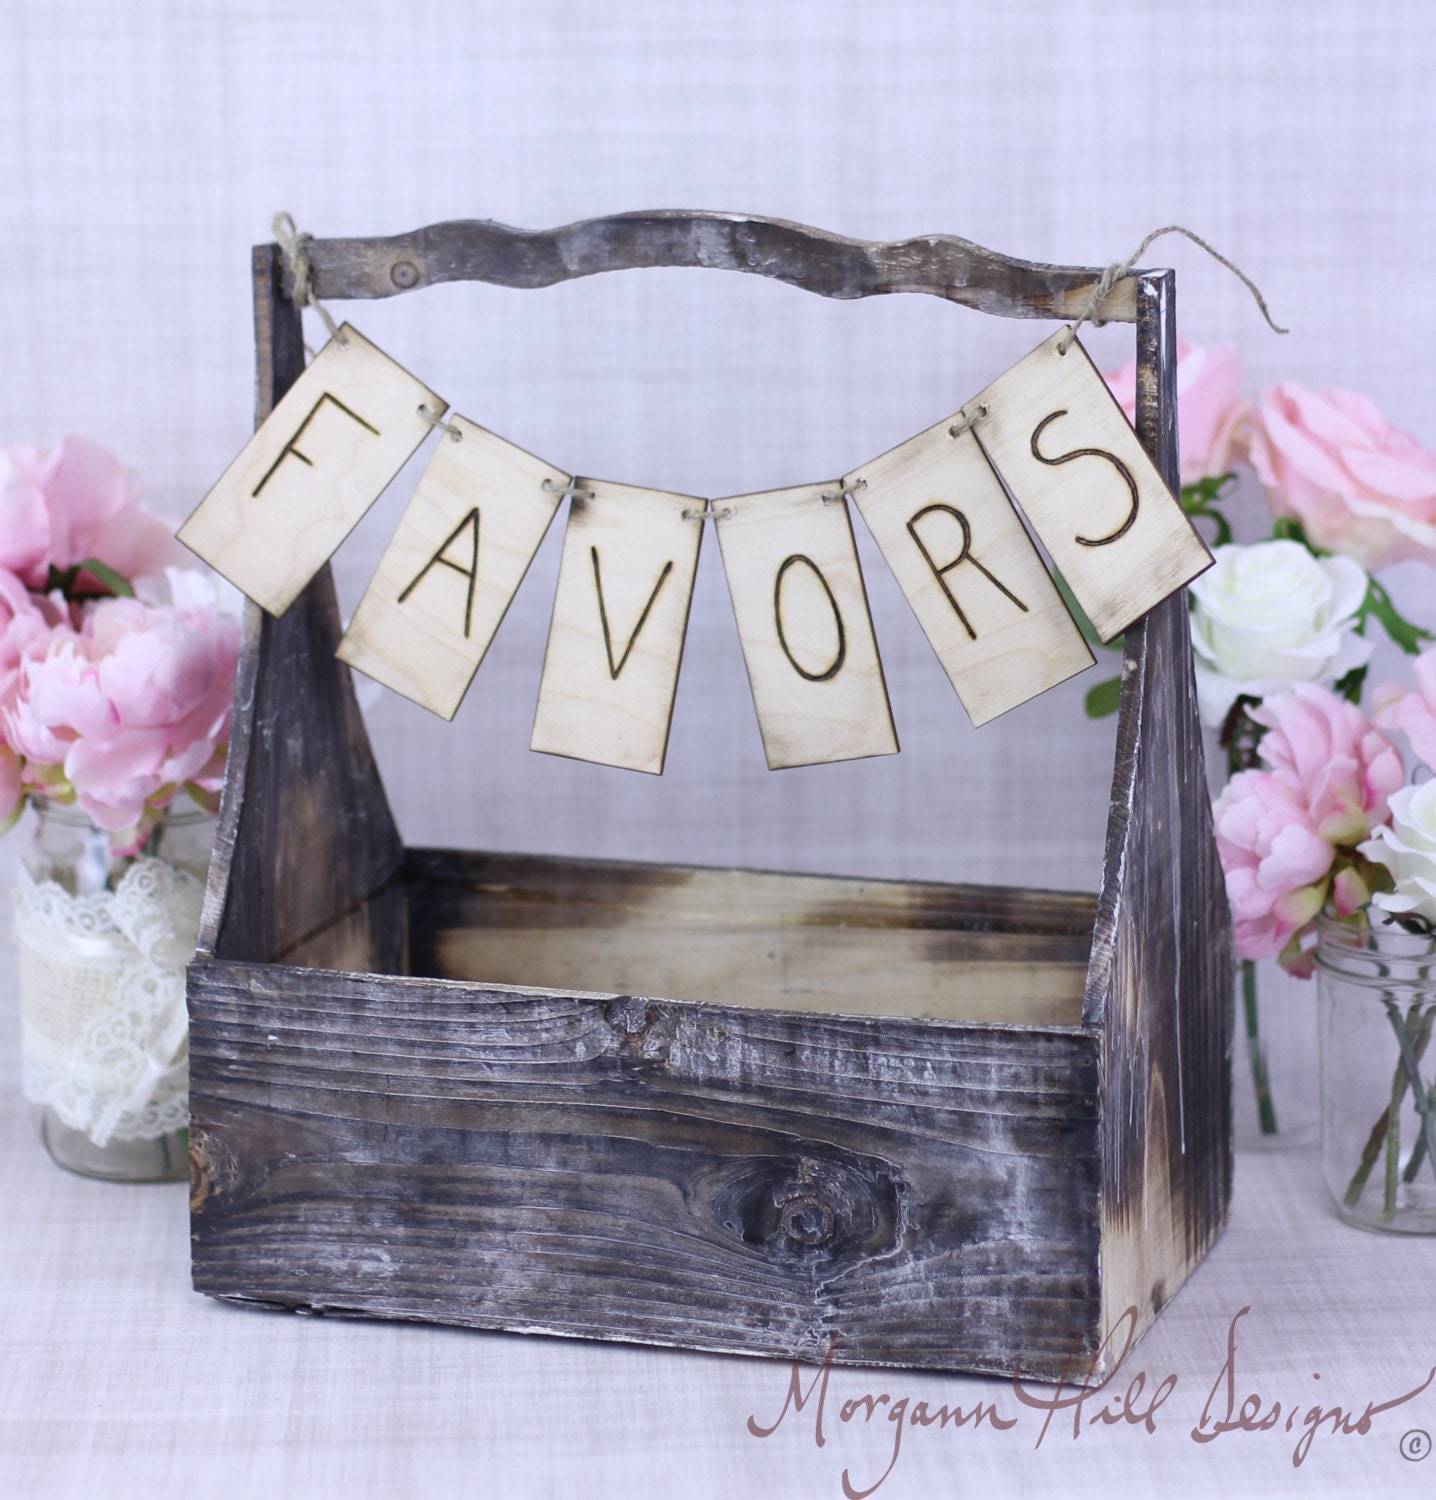 Rustic Basket With Favors Banner Sign Country Wedding Decor Barn Chic (Item Number 130028)